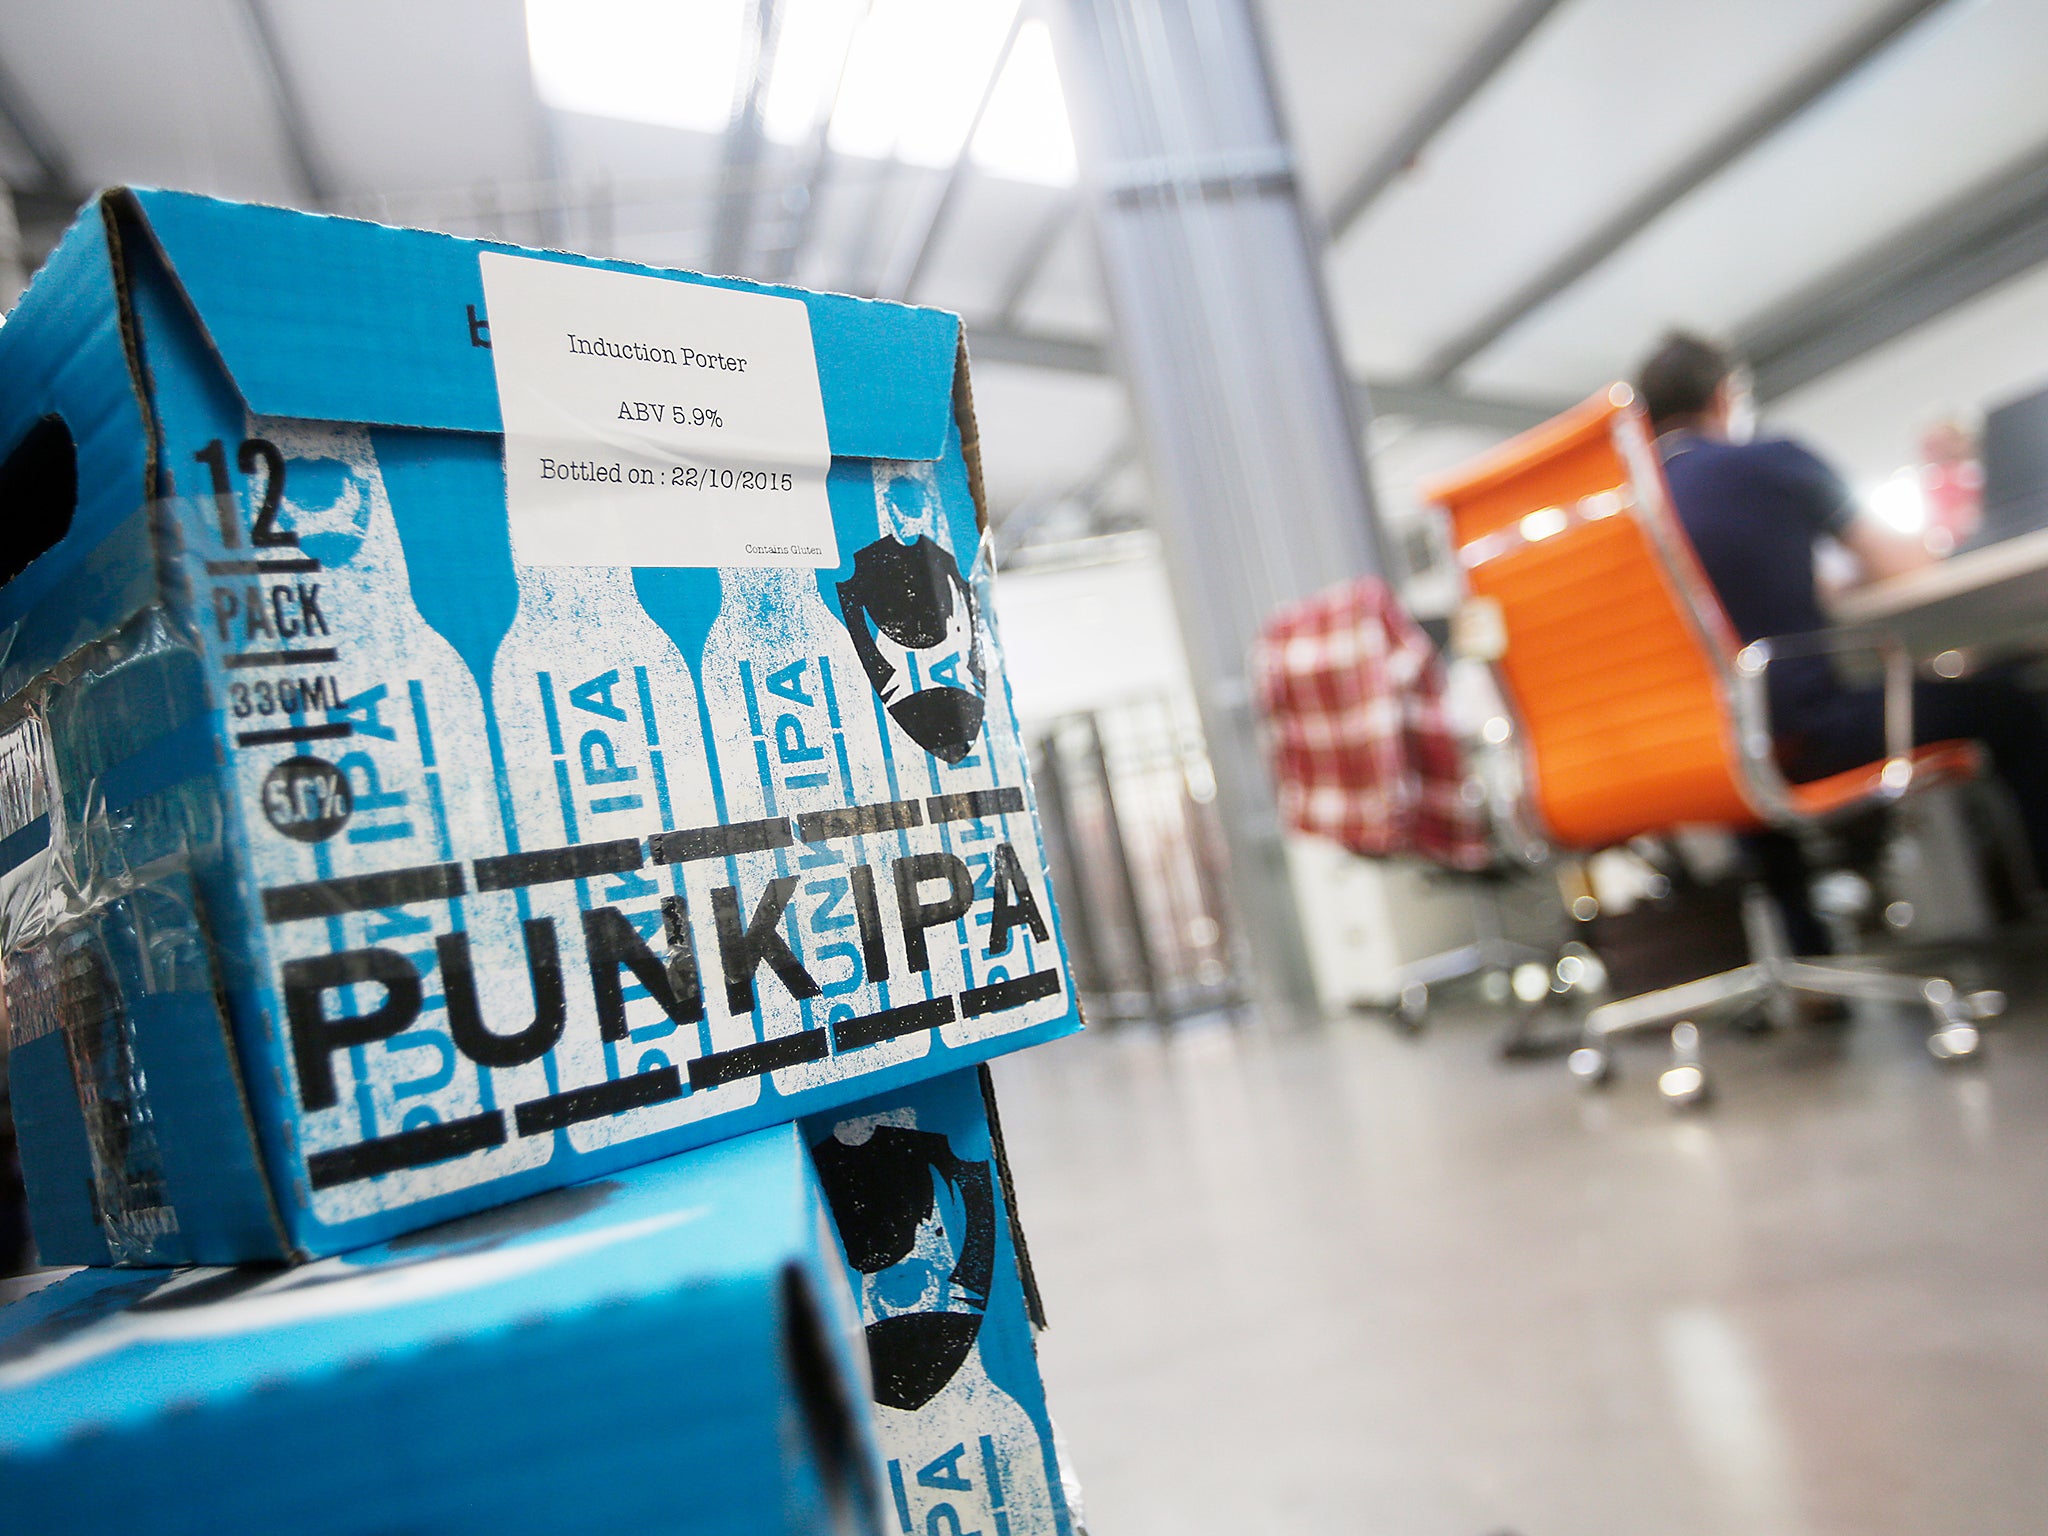 To claim a free can of BrewDog’s Punk IPA, voters can take a picture of themselves outside their polling stations and show that picture to staff at any BrewDog bar